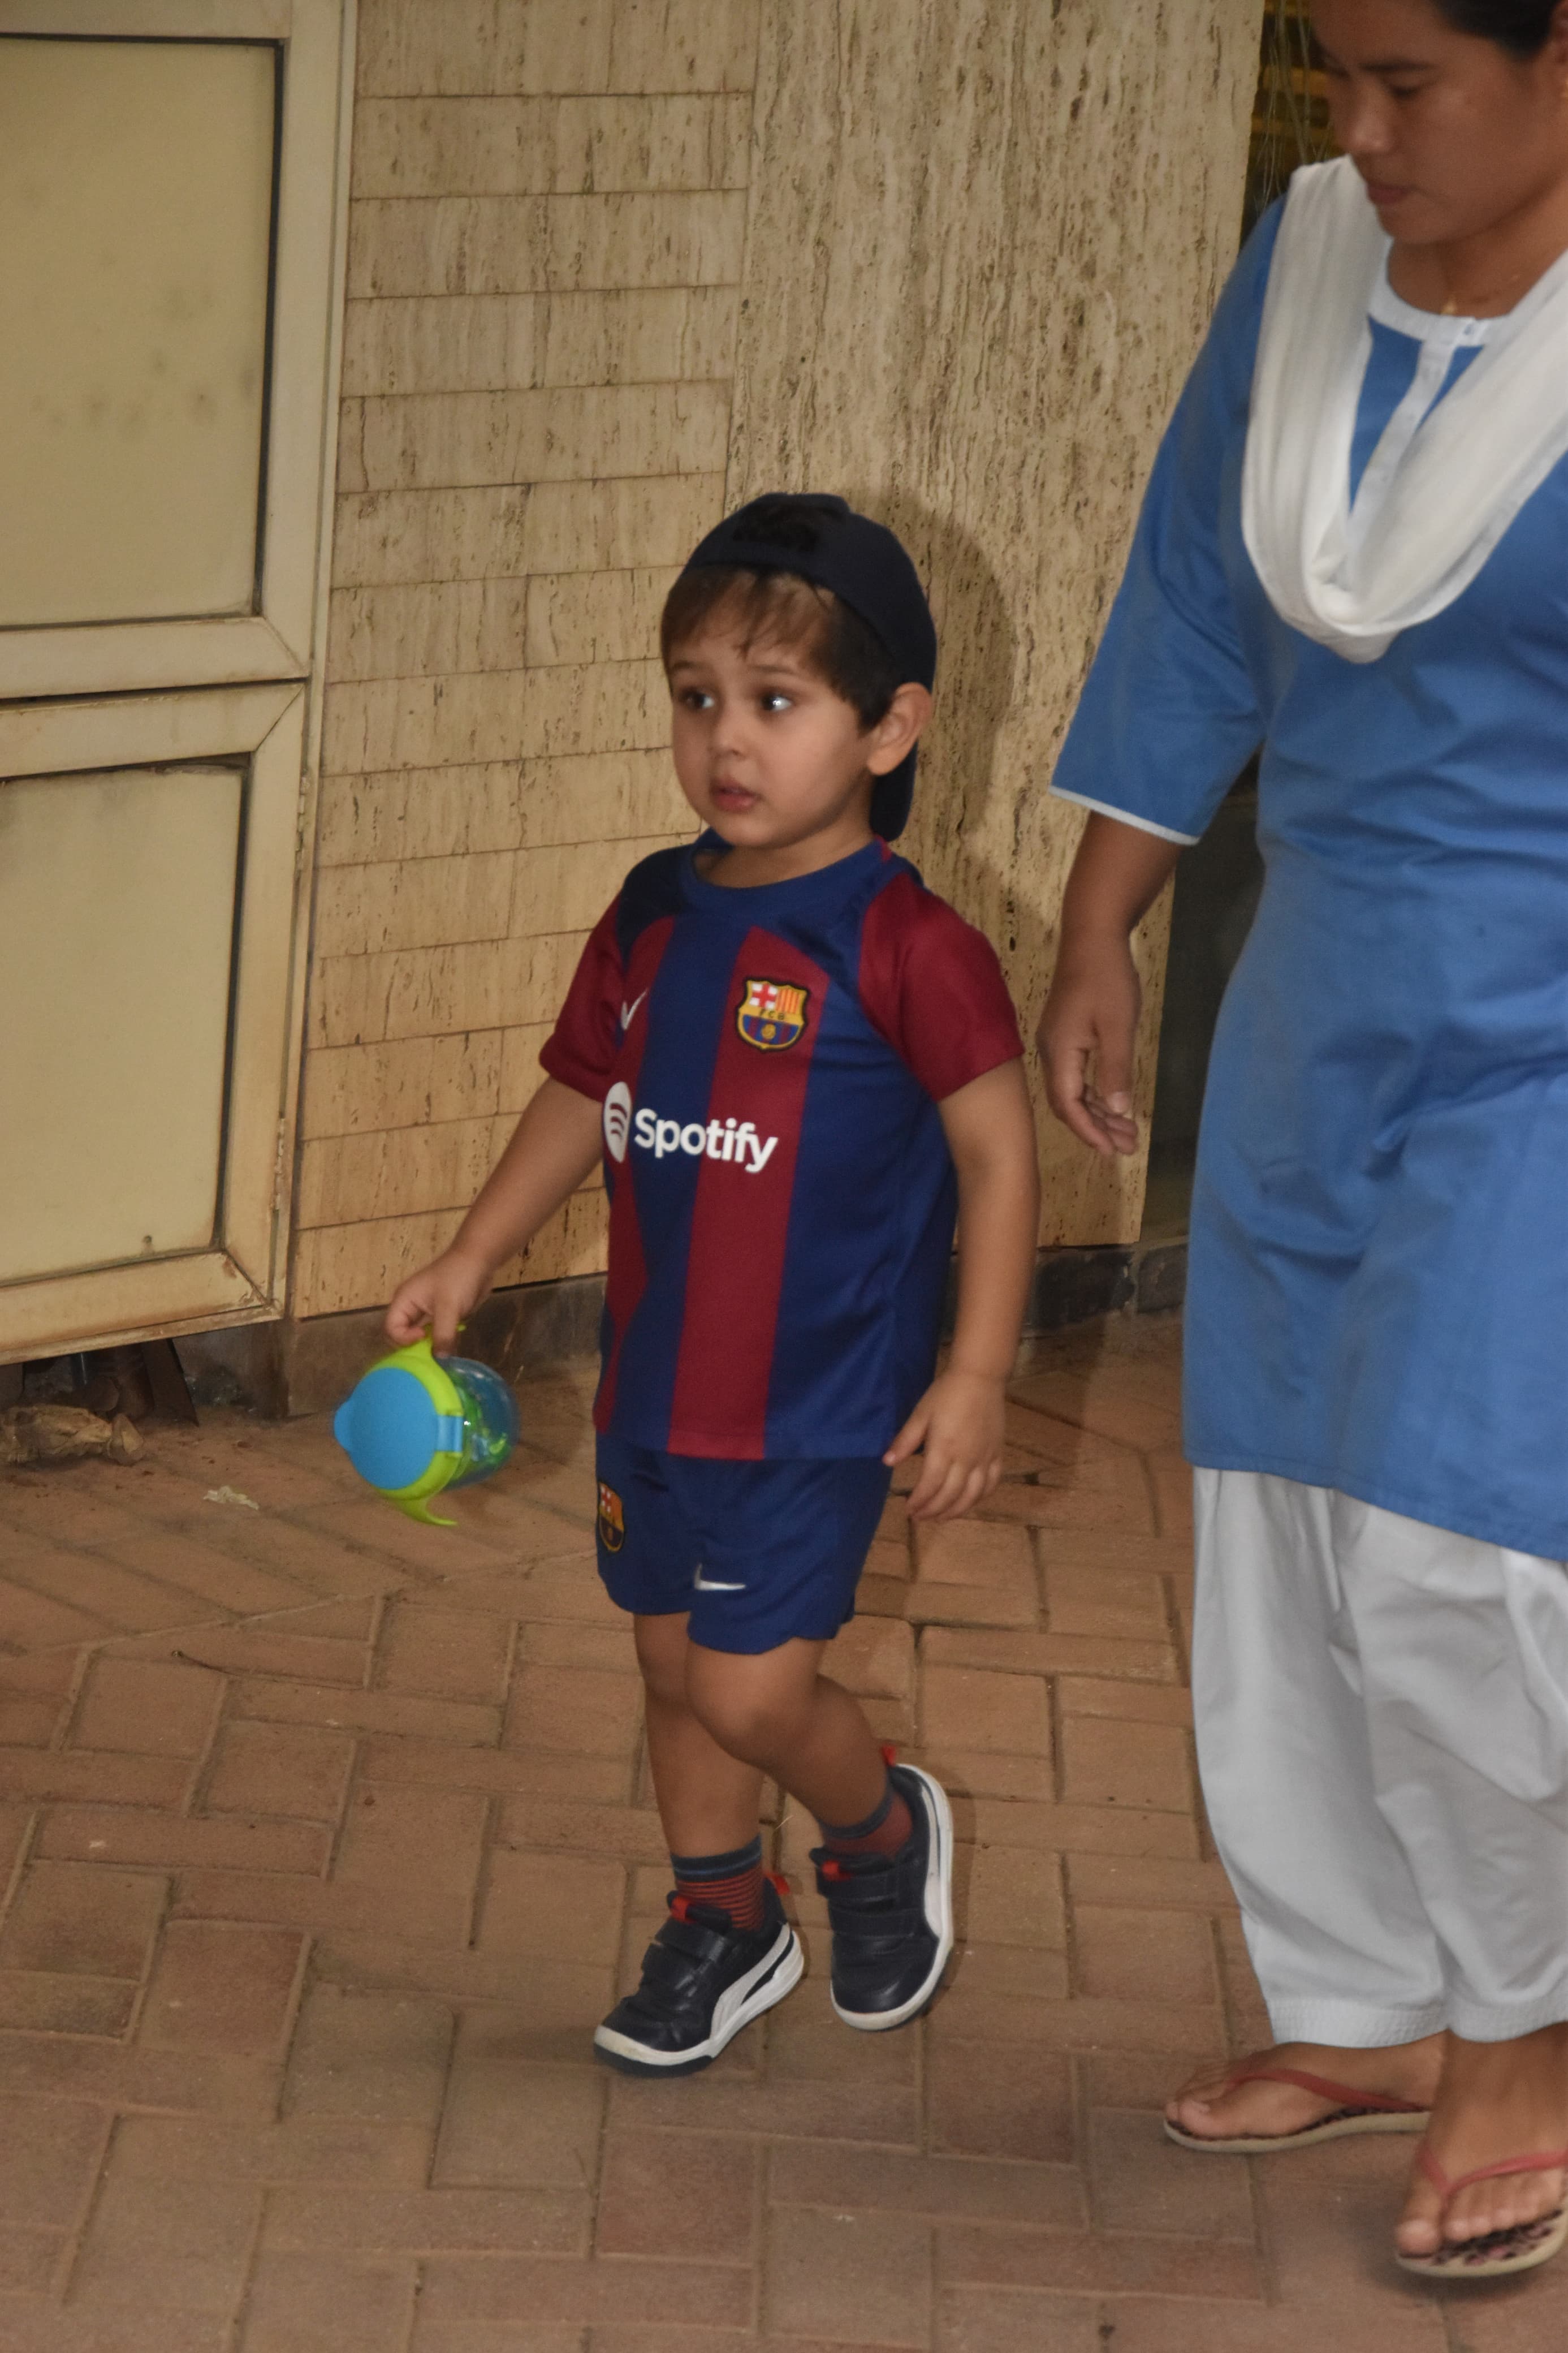 Jehangir, Kareena Kapoor's youngest son was spotted at the residence too